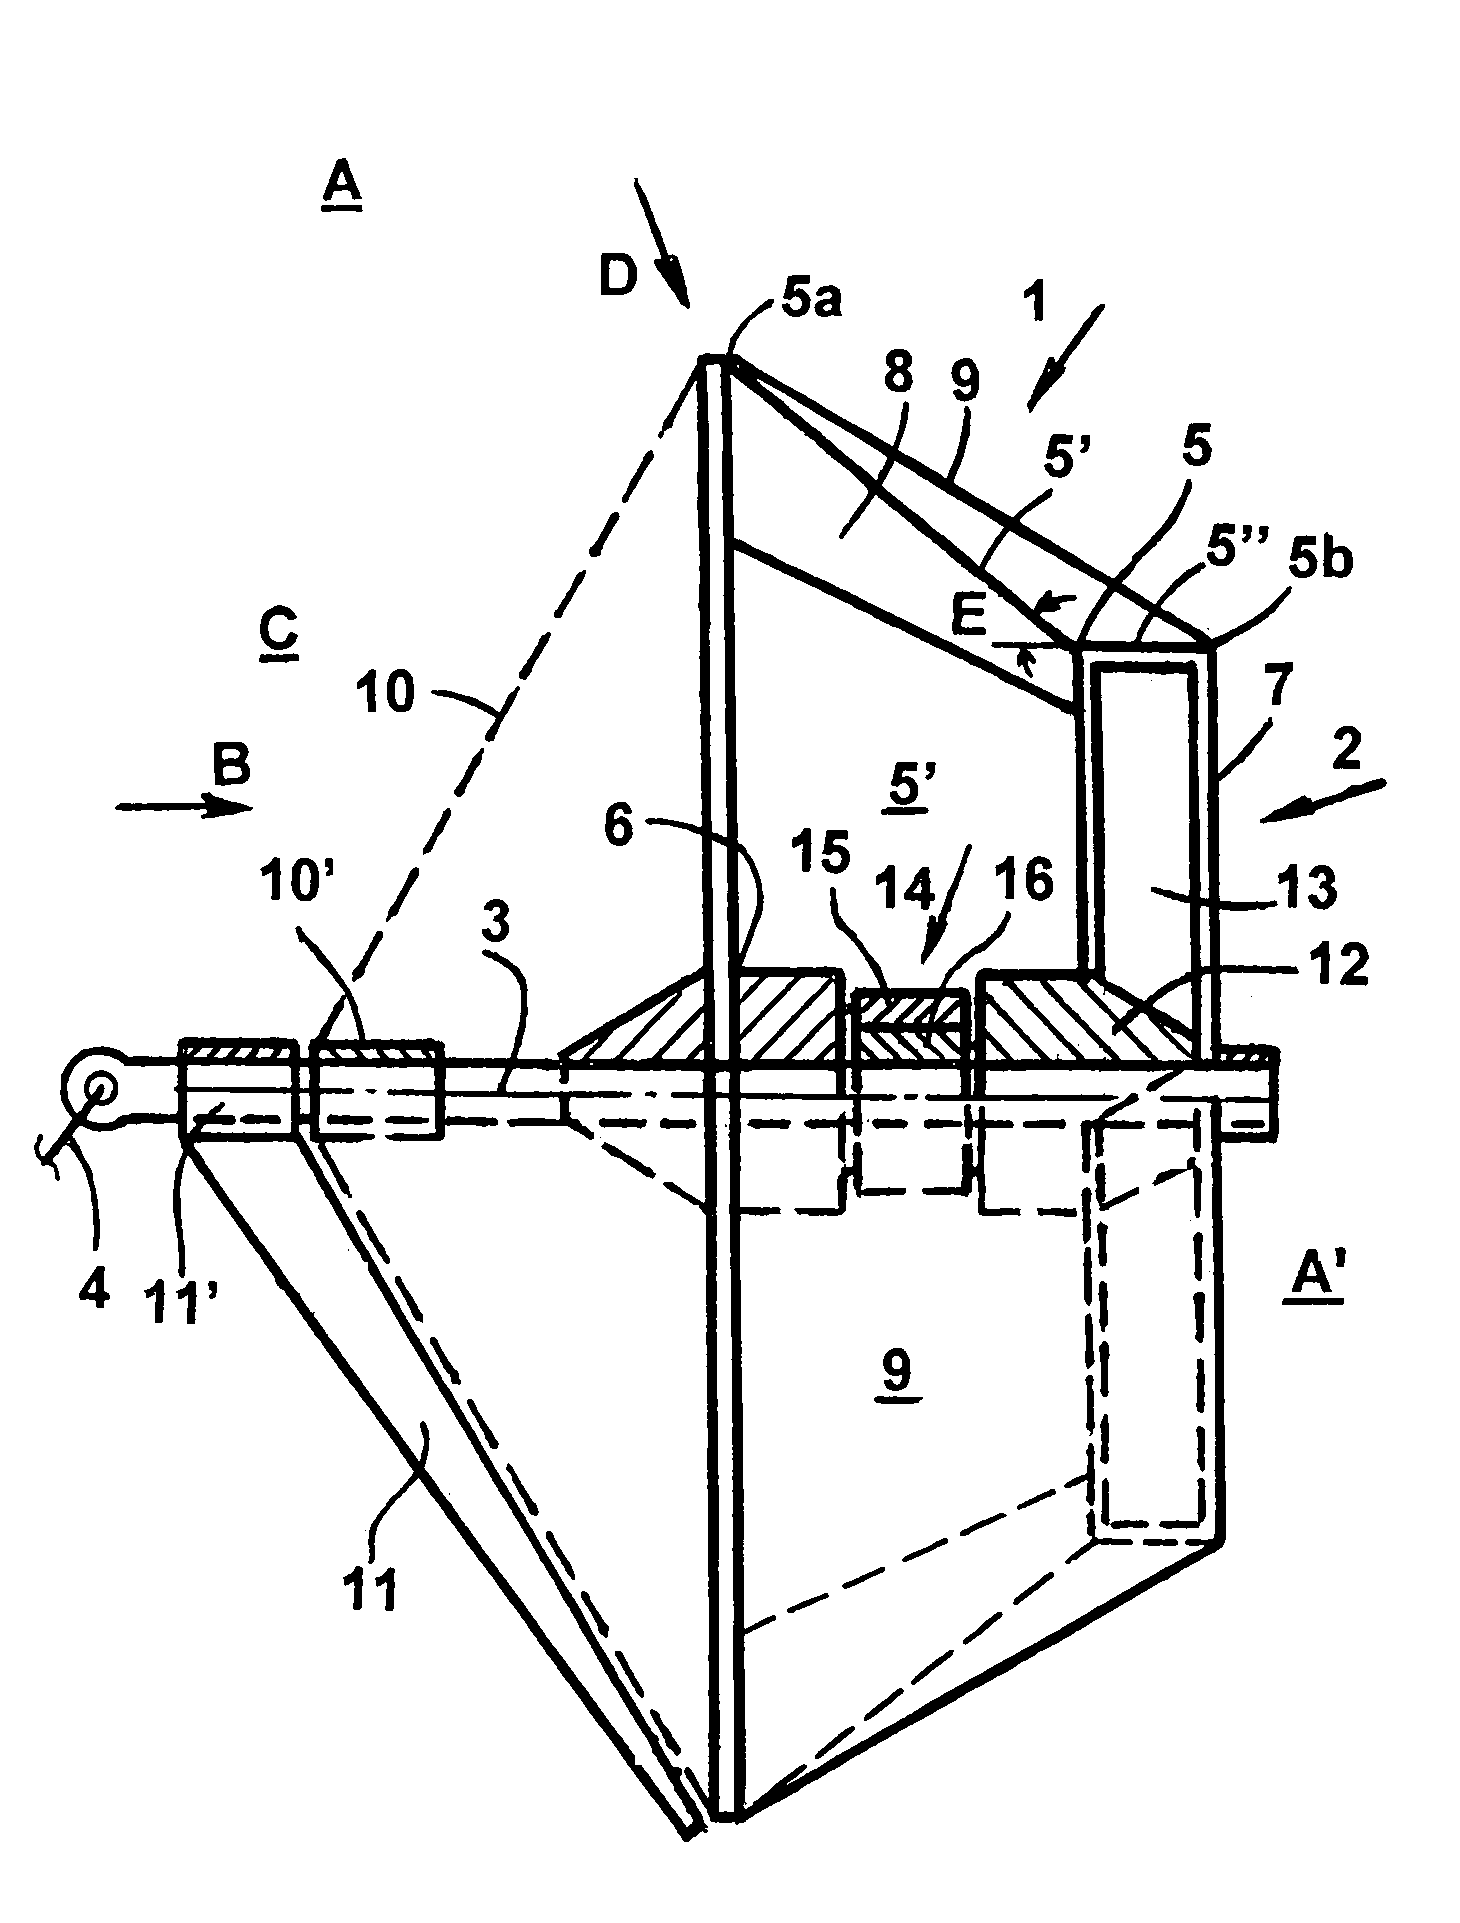 Apparatus for receiving and transferring kinetic energy from a flow and wave